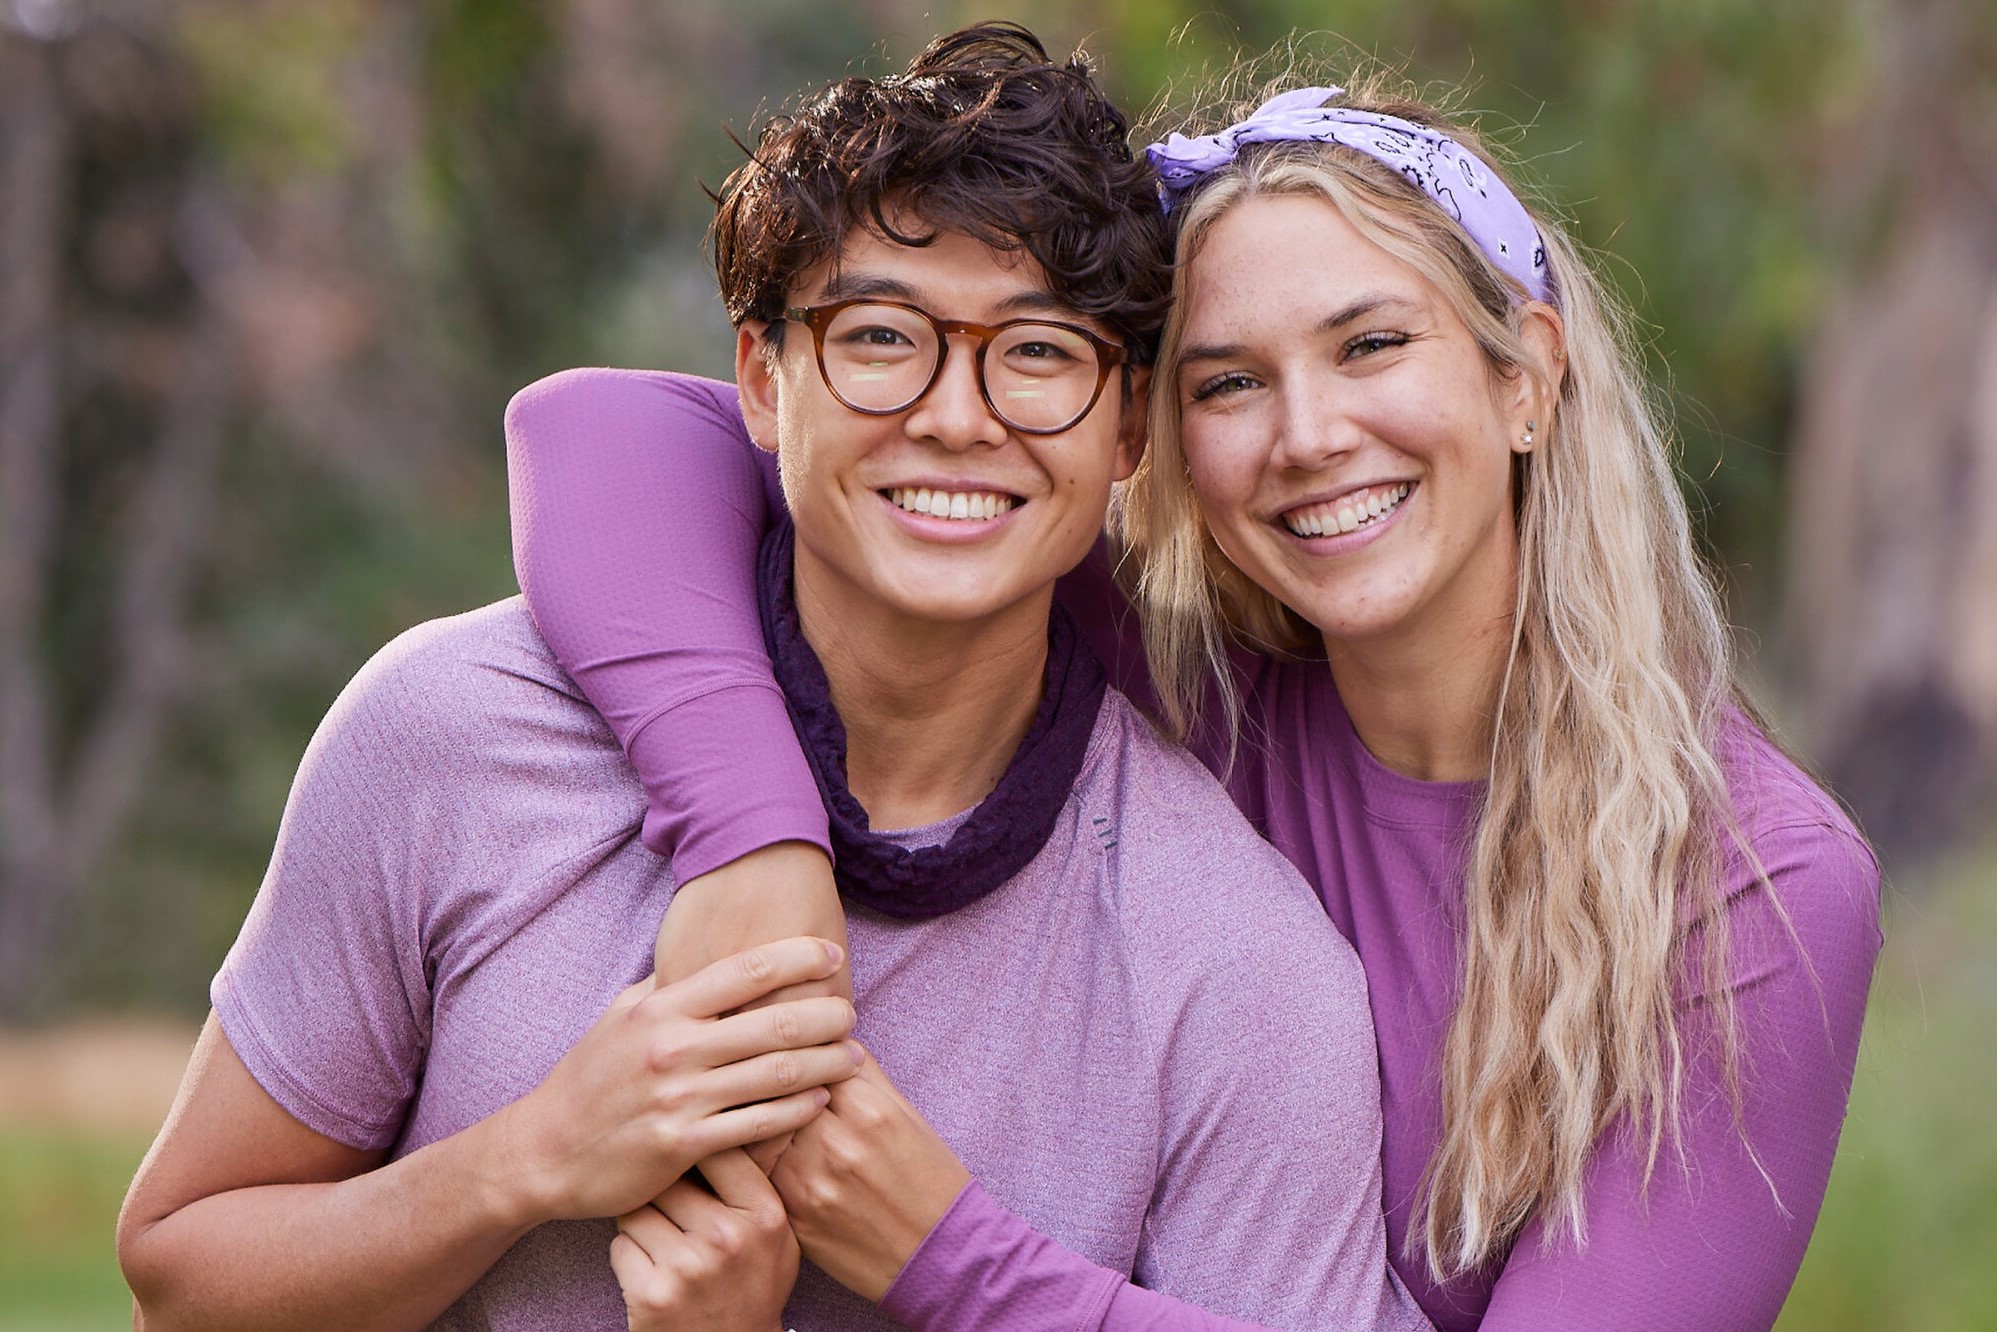 Derek Xiao and Claire Rehfuss, who, according to 'The Amazing Race' Season 34 spoilers, make it far in the competition, pose for promotional photos for the series. Derek wears a light purple shirt, a dark purple headband around his neck, and glasses. Claire wears a purple long-sleeved shirt and a light purple bandana.